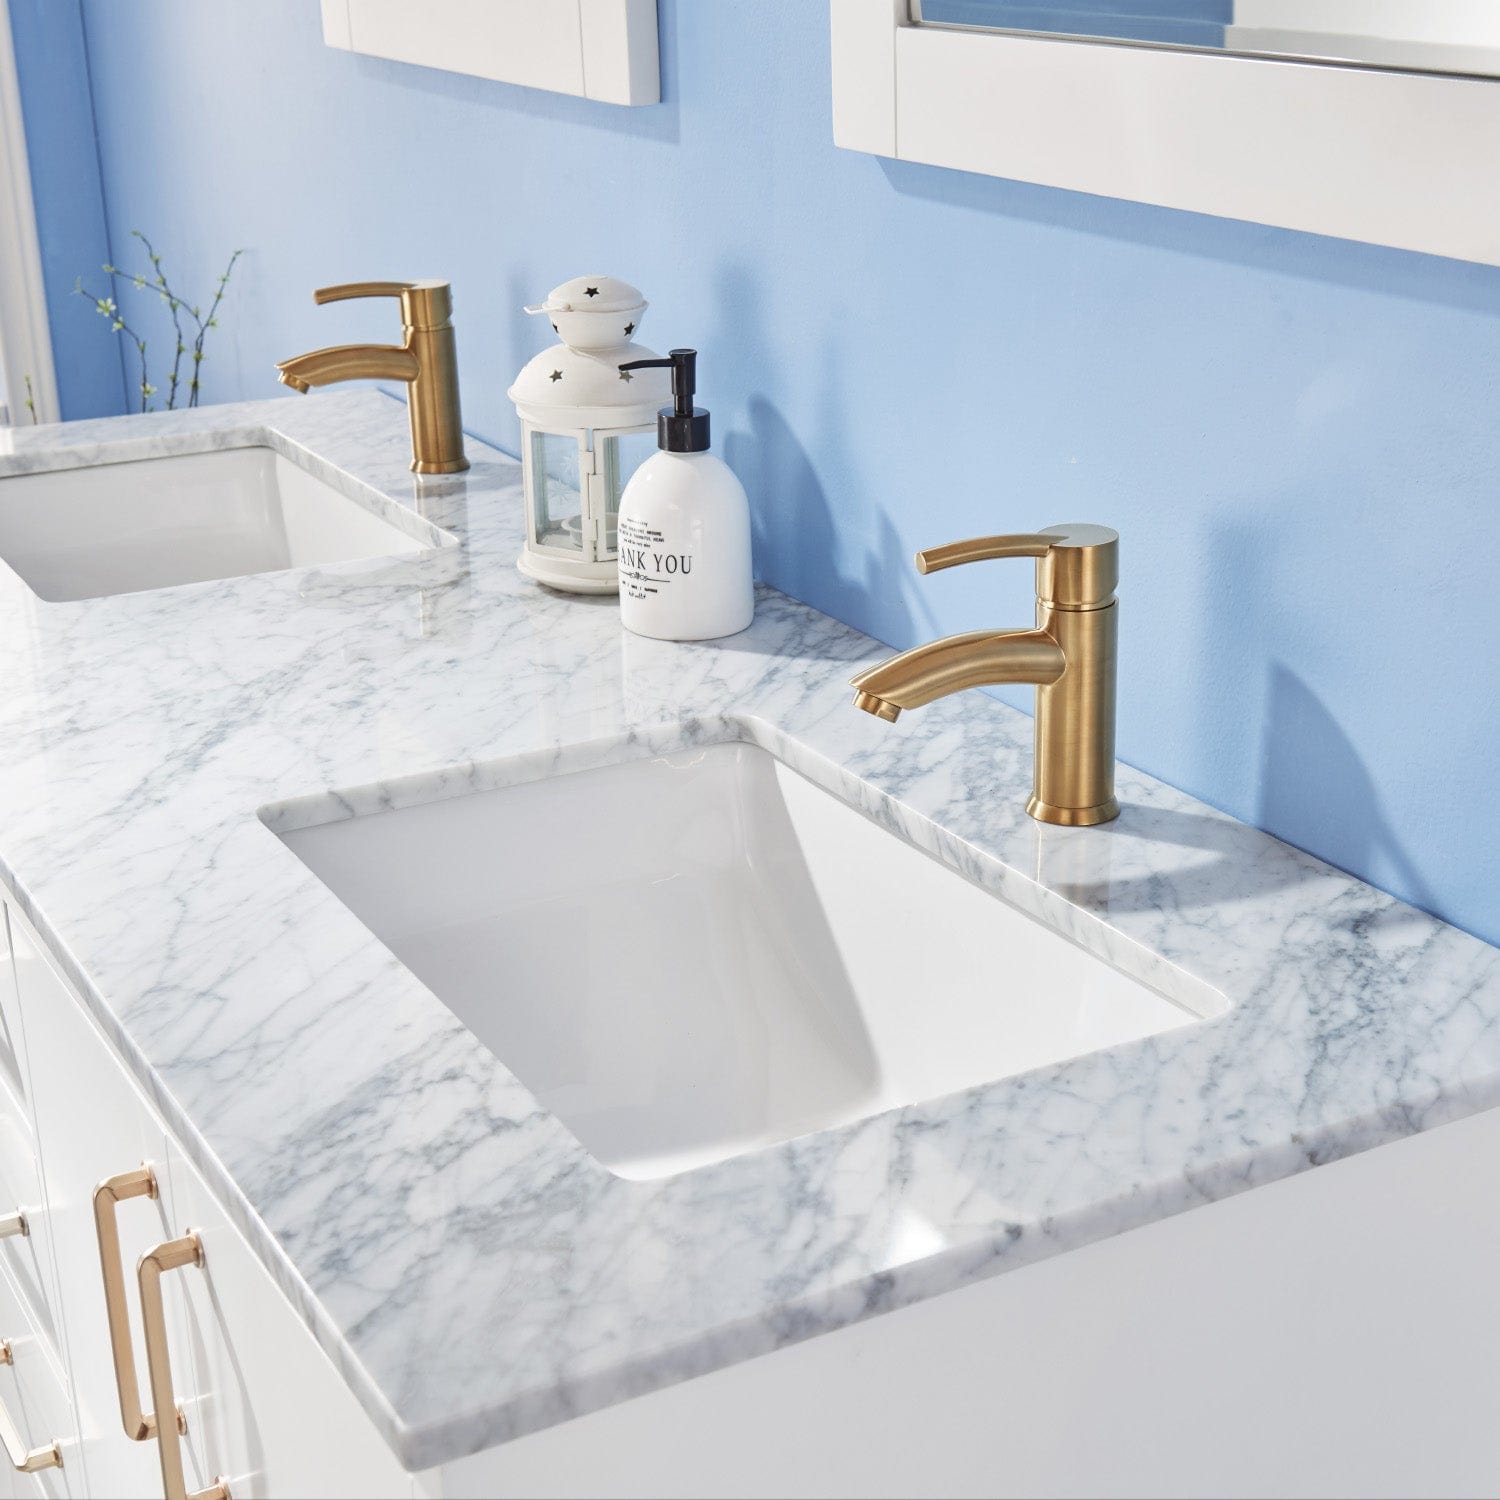 Altair Sutton 60" Double Bathroom Vanity Set in White and Carrara White Marble Countertop without Mirror 541060-WH-CA-NM - Molaix631112971980Vanity541060-WH-CA-NM